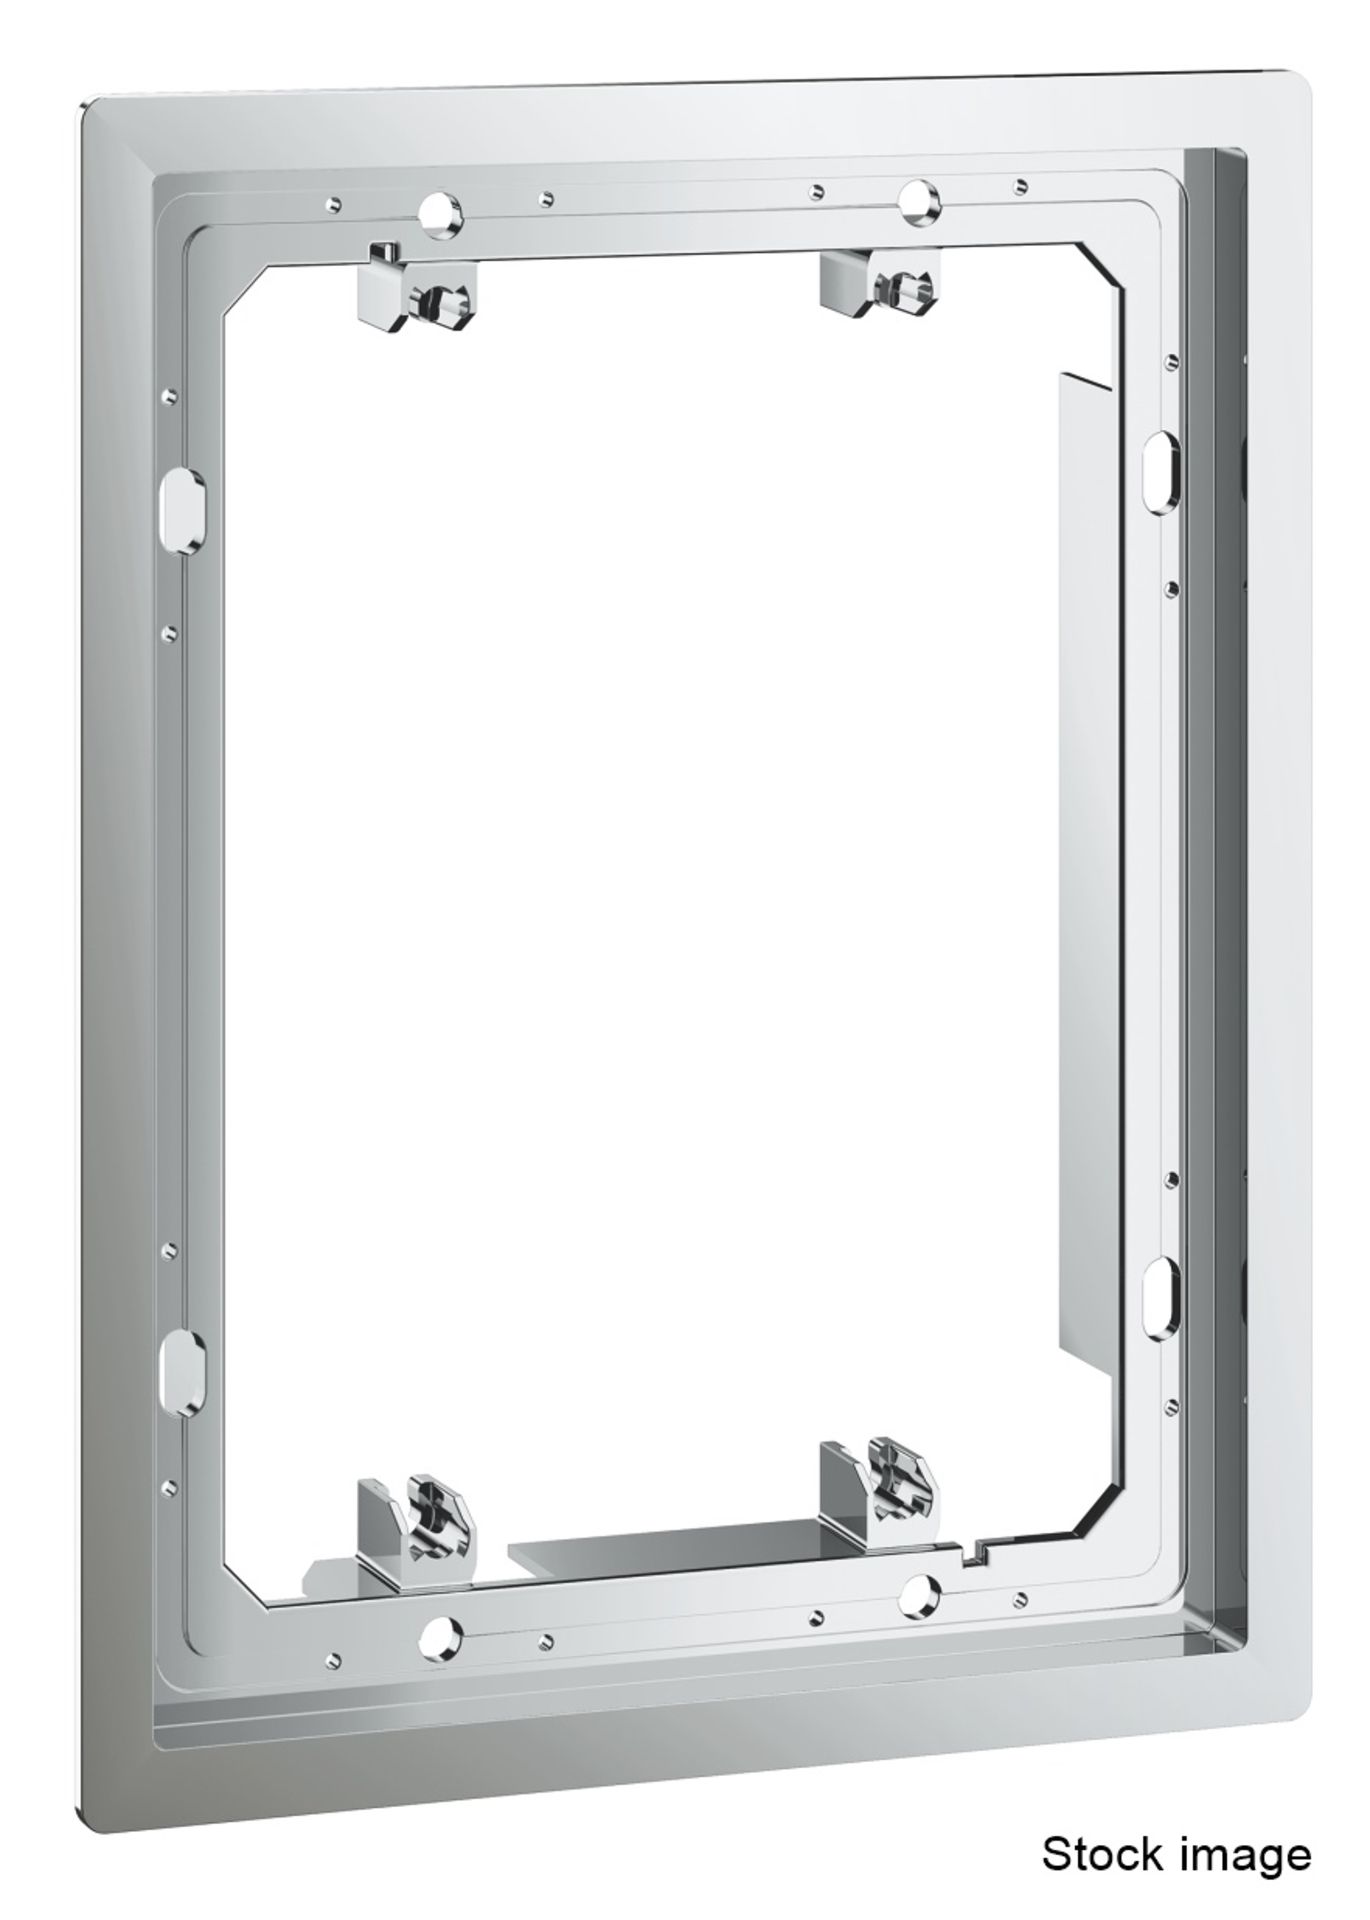 1 x GROHE Covering Frame, With A Chrome Finish - Ref: 38958000 - New & Boxed Stock - RRP £88.00 -